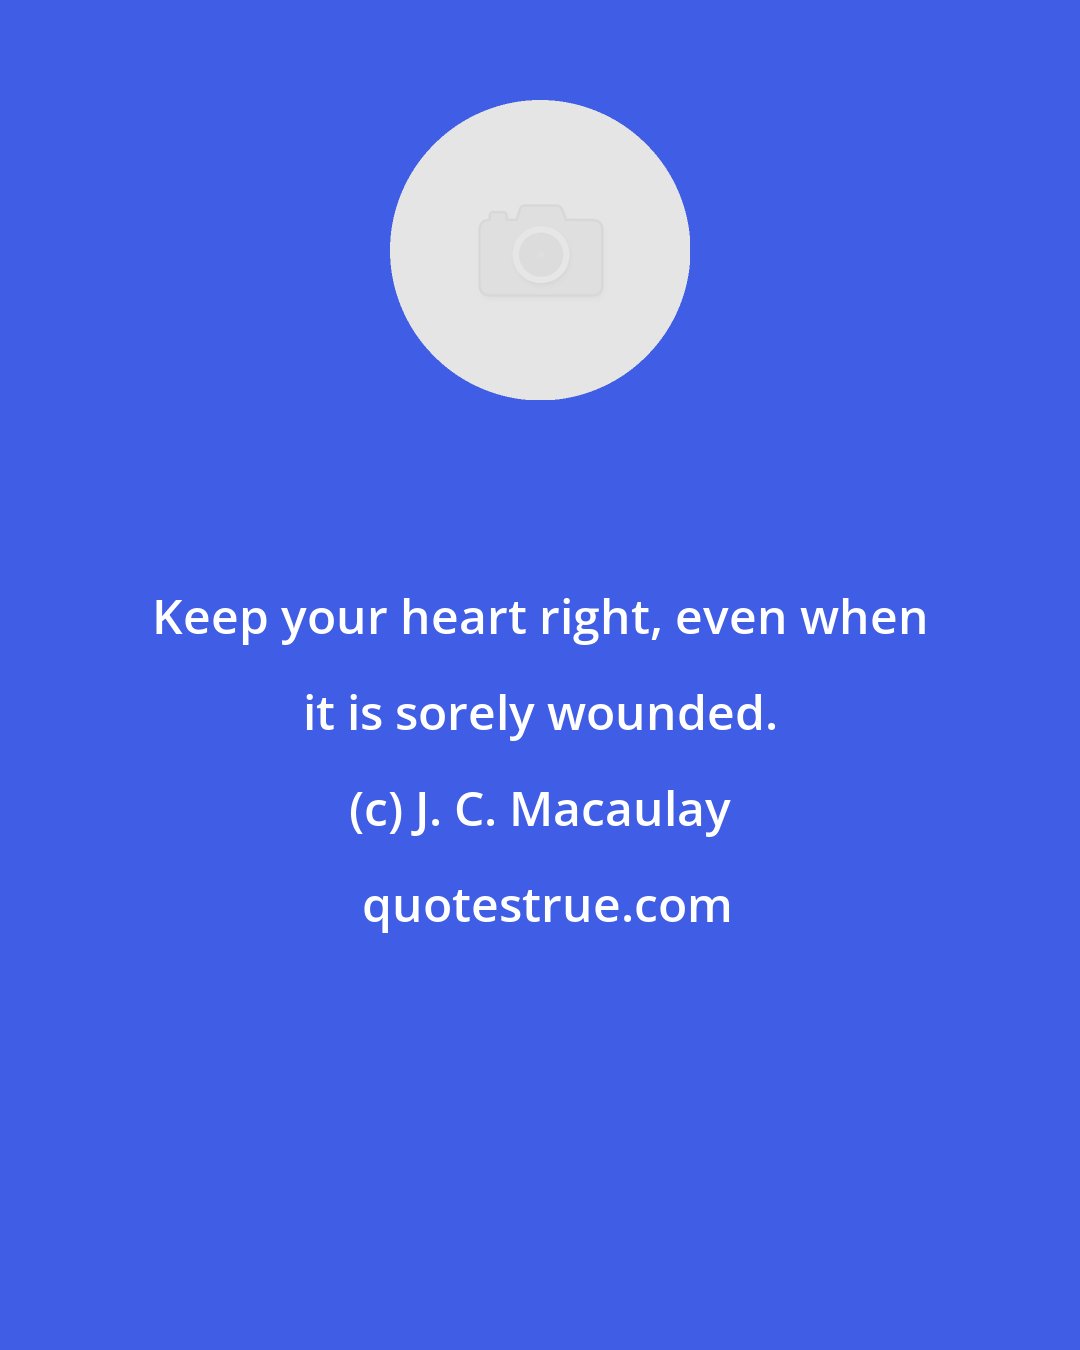 J. C. Macaulay: Keep your heart right, even when it is sorely wounded.